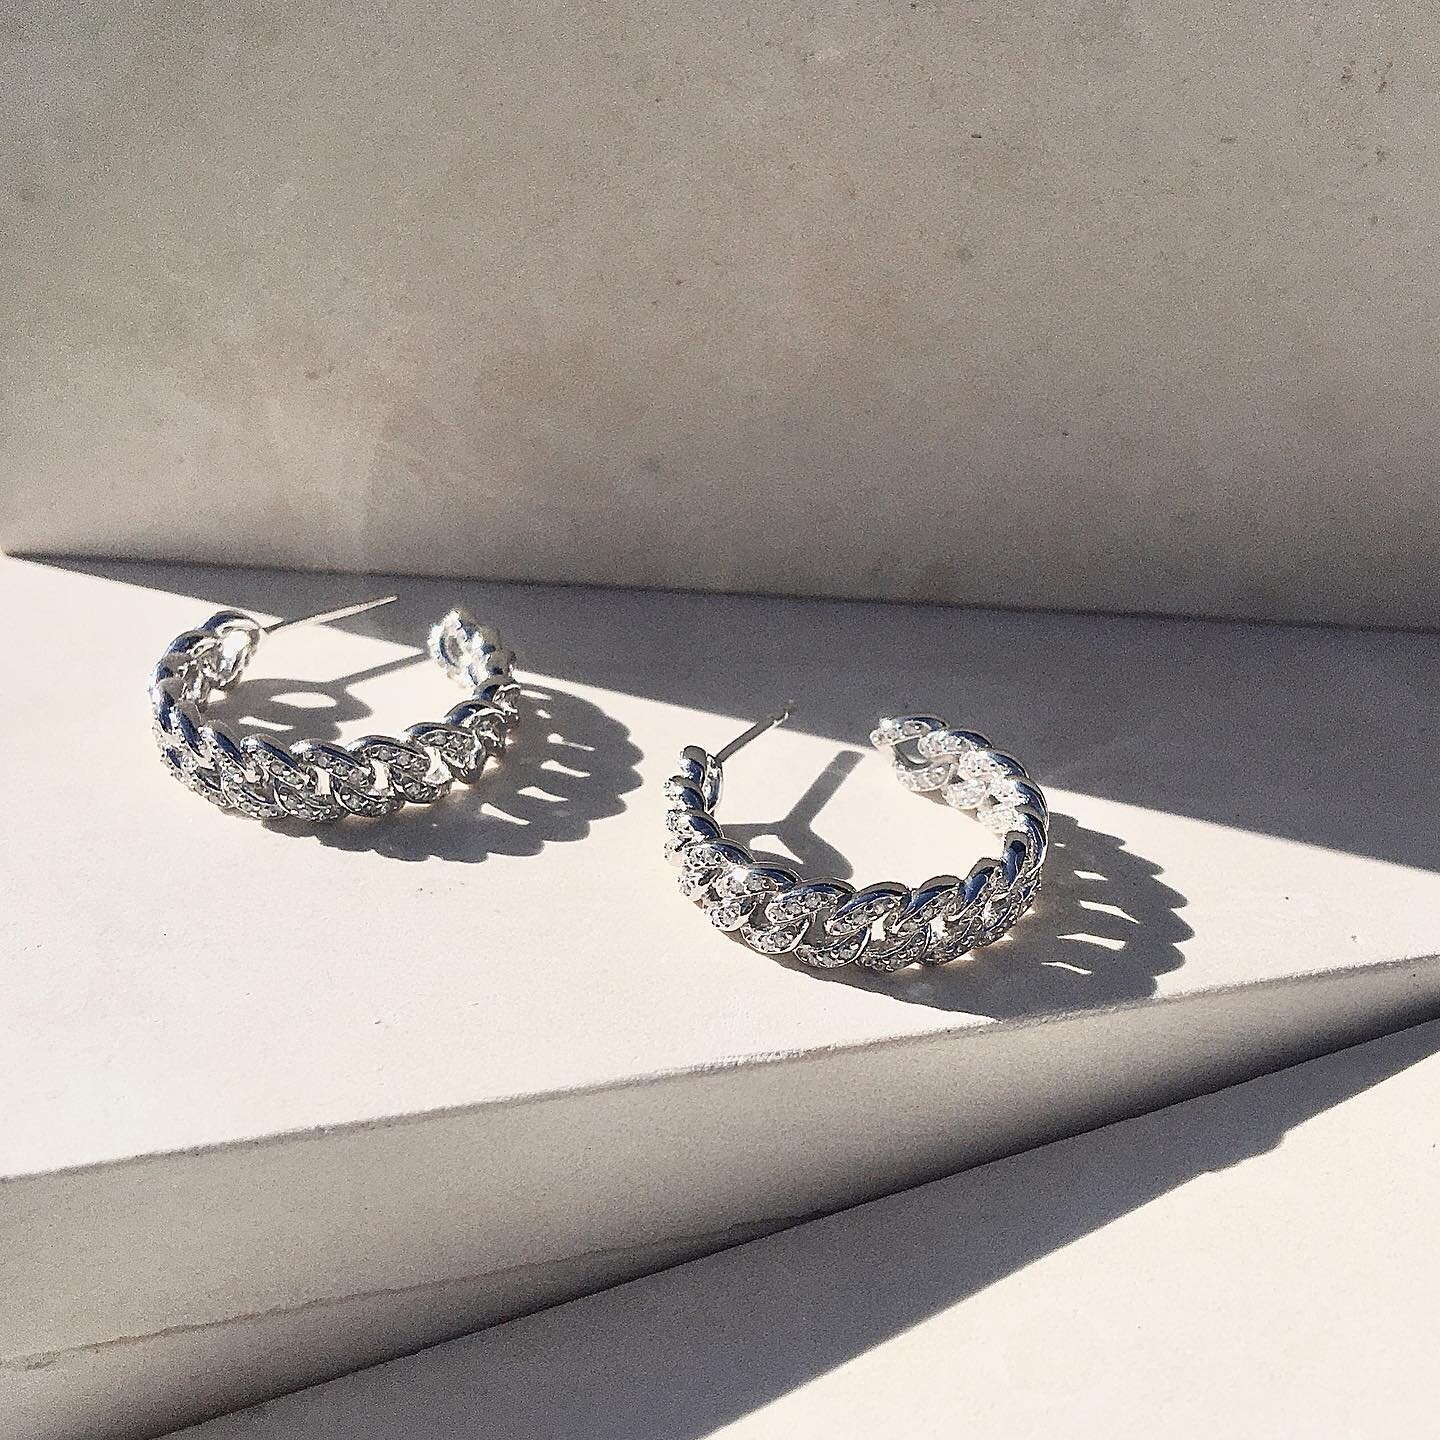 Our own knack for nailing what&rsquo;s next 

&lsquo;Sand&rsquo; sculpted diamant&eacute; dune-like shape link hoop earrings
.
.
. 
#TogetherWithKassali #SpreadYourLove
#ArtSculptureGlam #hoopearrings #rhodium #gemaporter #modernearrings #aaronkassal